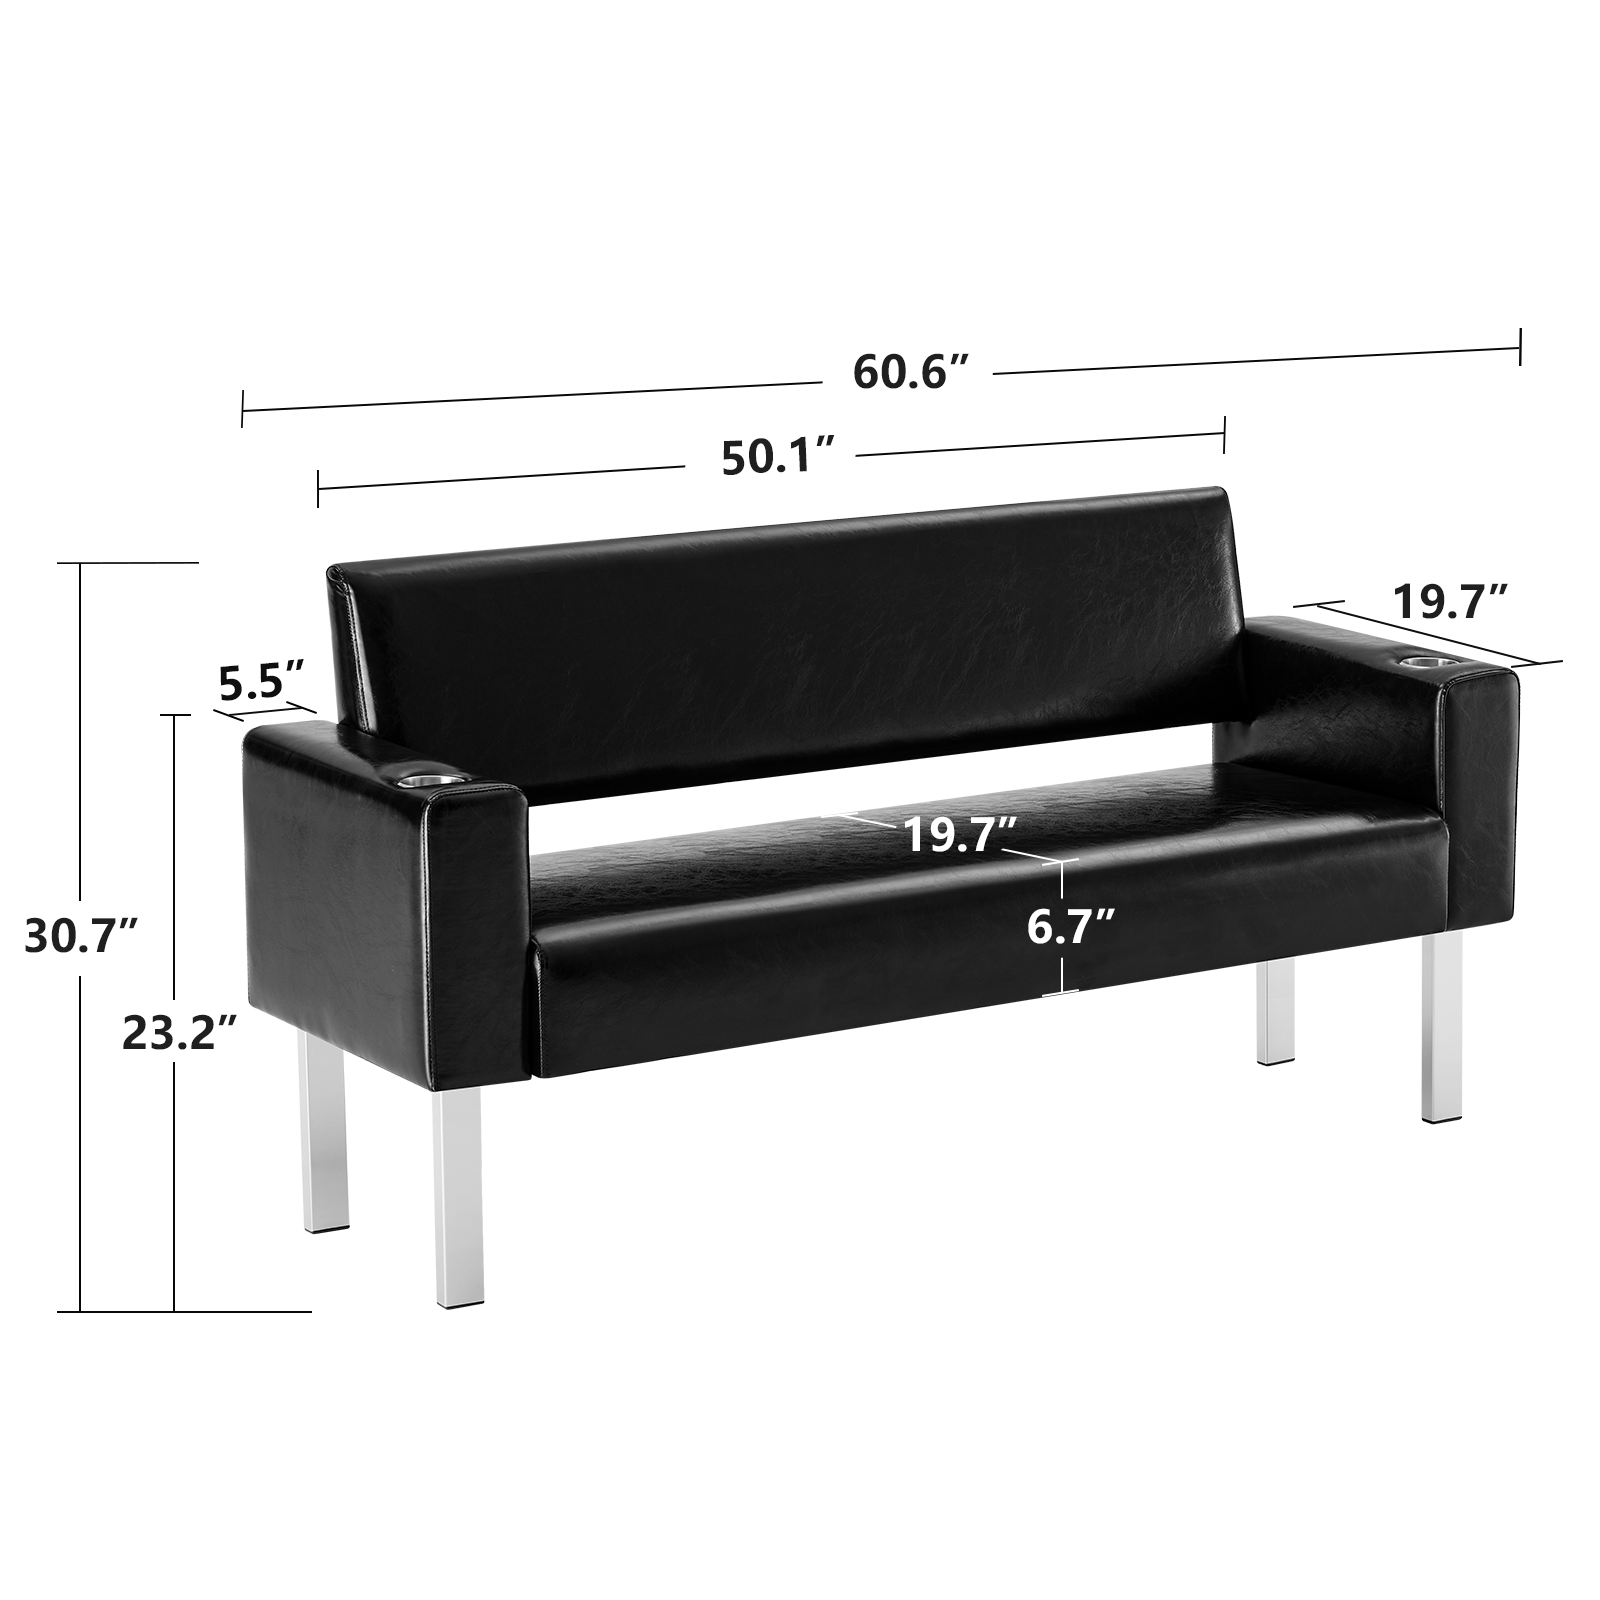 OmySalon Waiting Room Bench Reception Bench with 2 Cup Holders Black